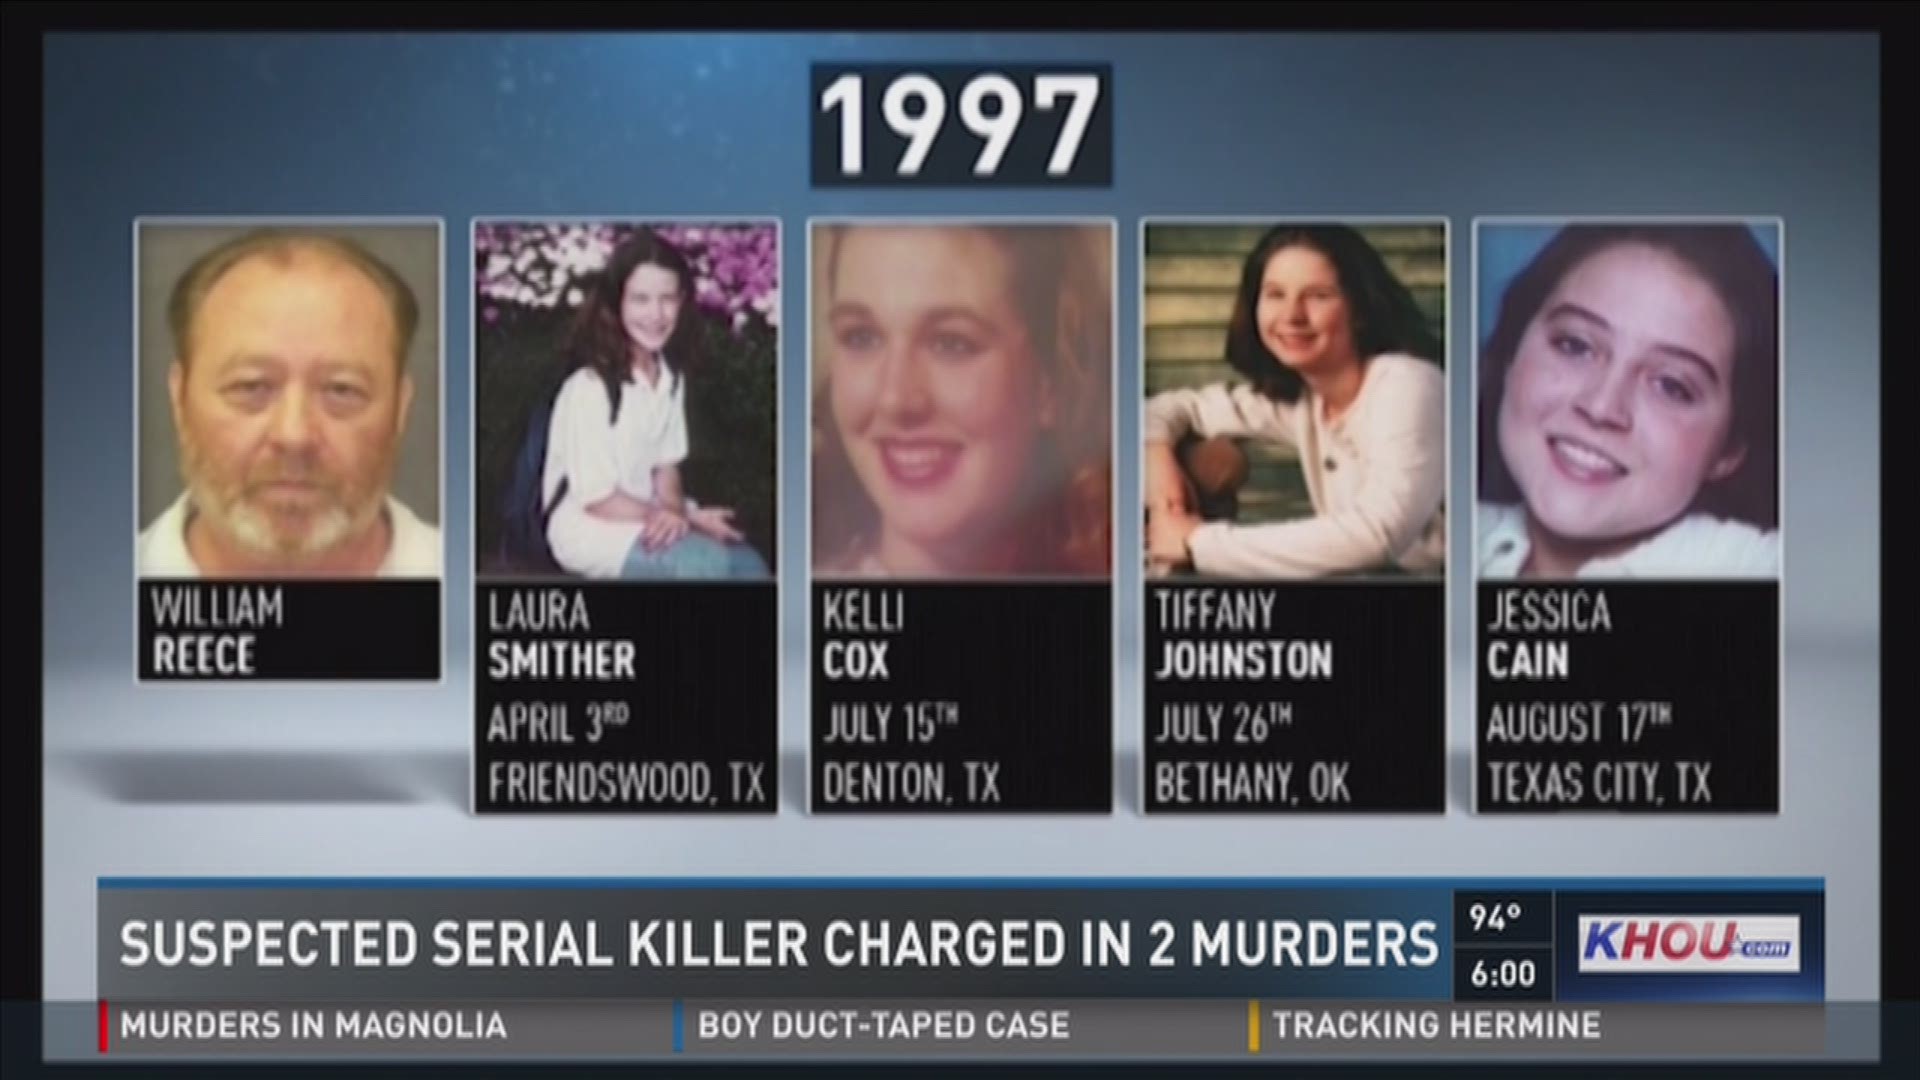 A Galveston County grand jury indicted suspected serial killer William Reece for the murders of two Texas girls.